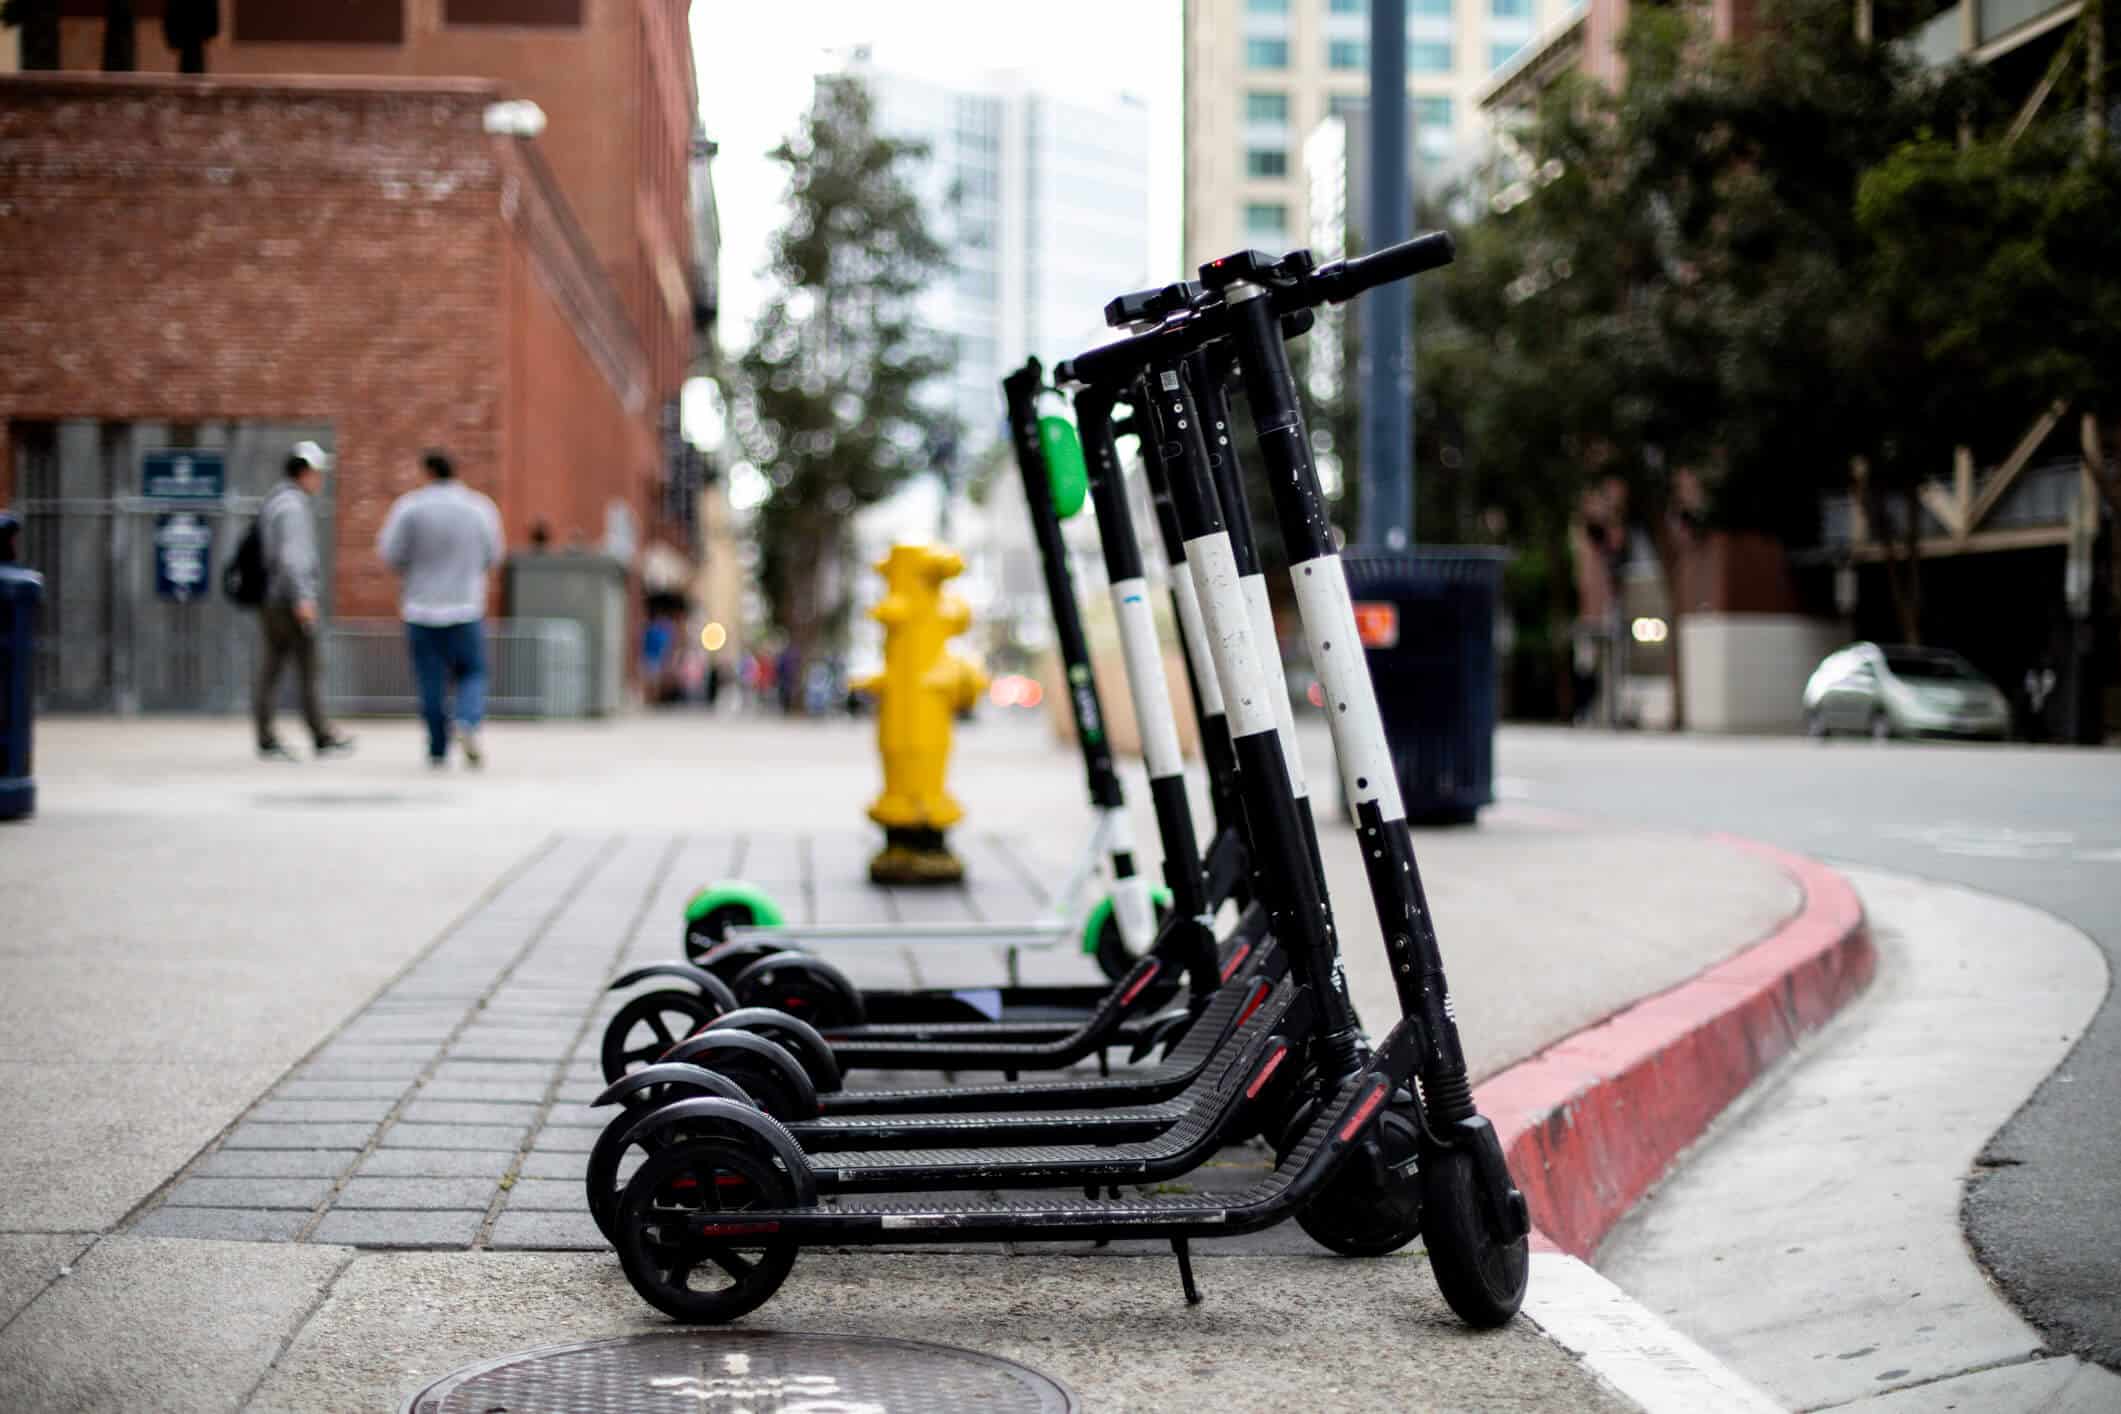 Ride Share Electric Scooter Accidents